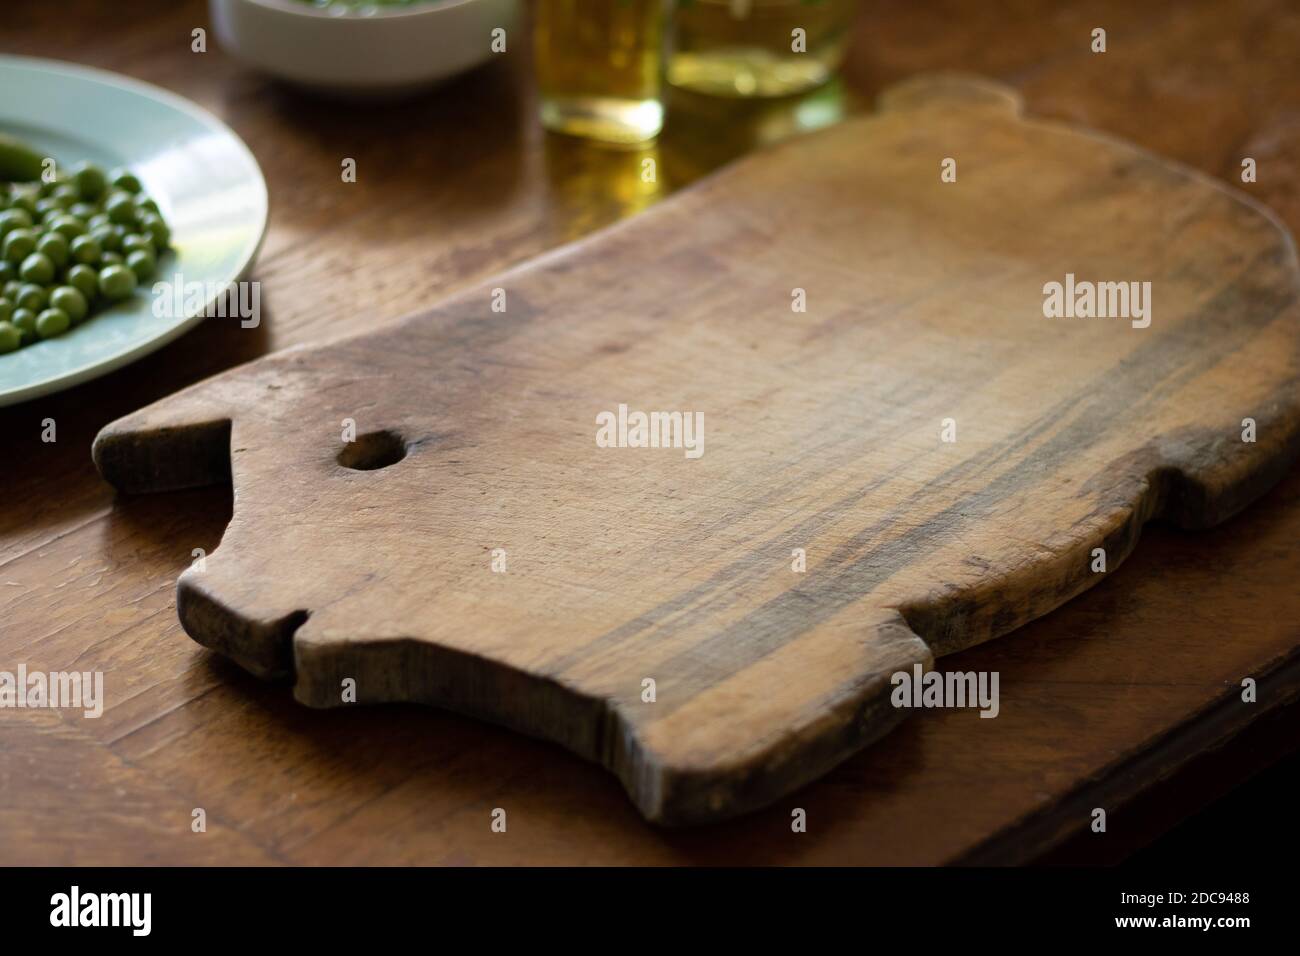 wooden cutting board shaped like a piggy, a plate with green peas and a bottle of oil on a wooden table Stock Photo